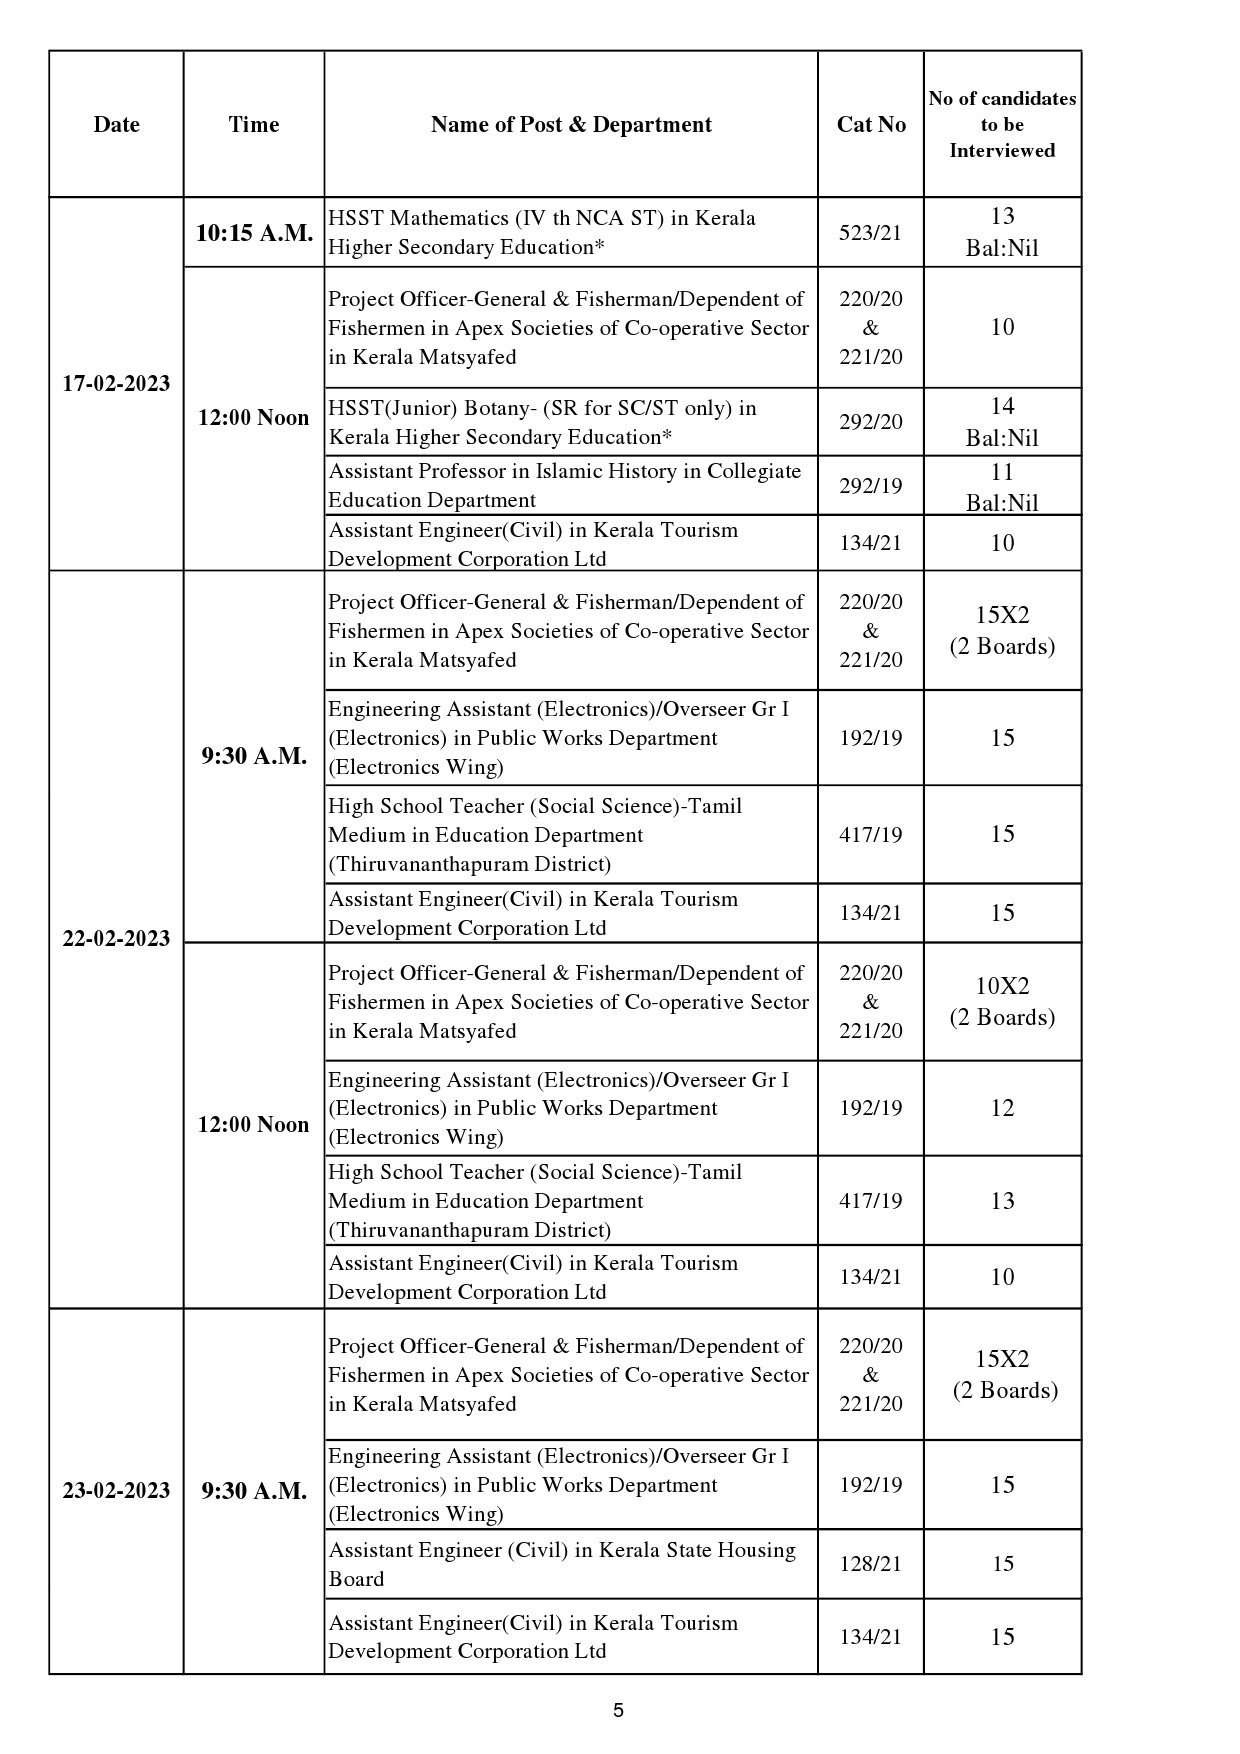 KPSC Interview Programme For The Month Of February 2023 - Notification Image 5